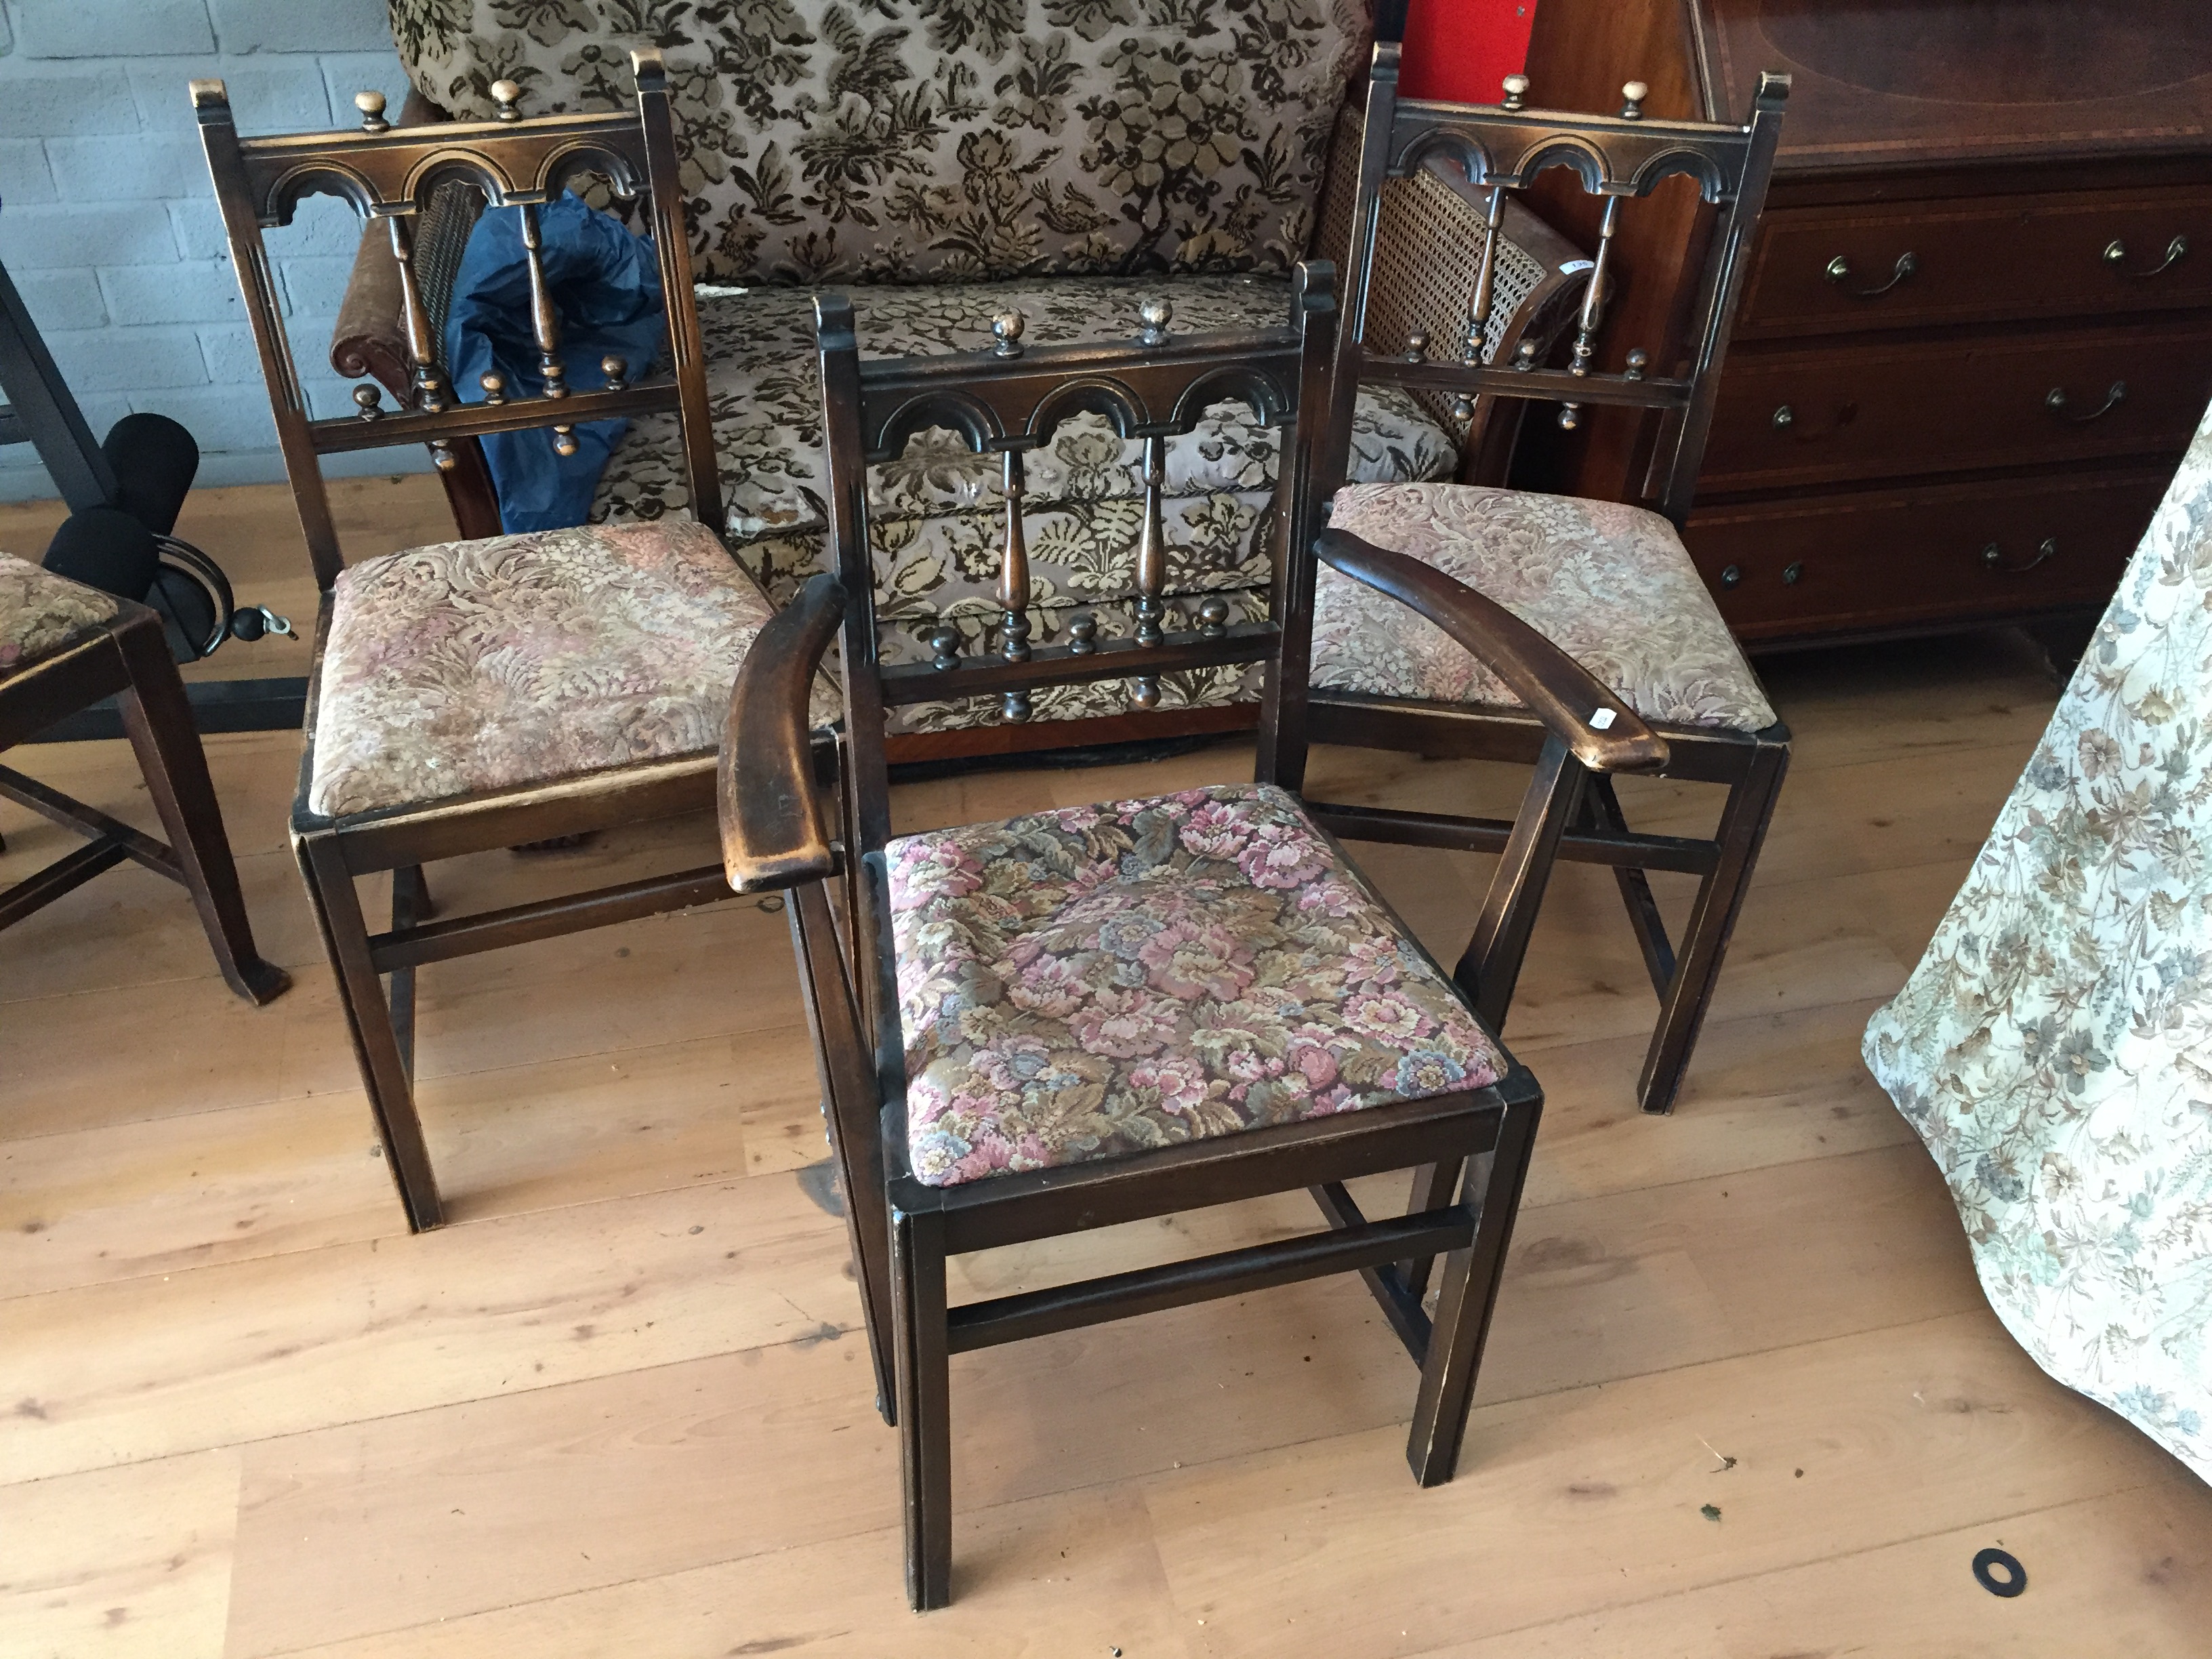 Three dining chairs with pop out seats.